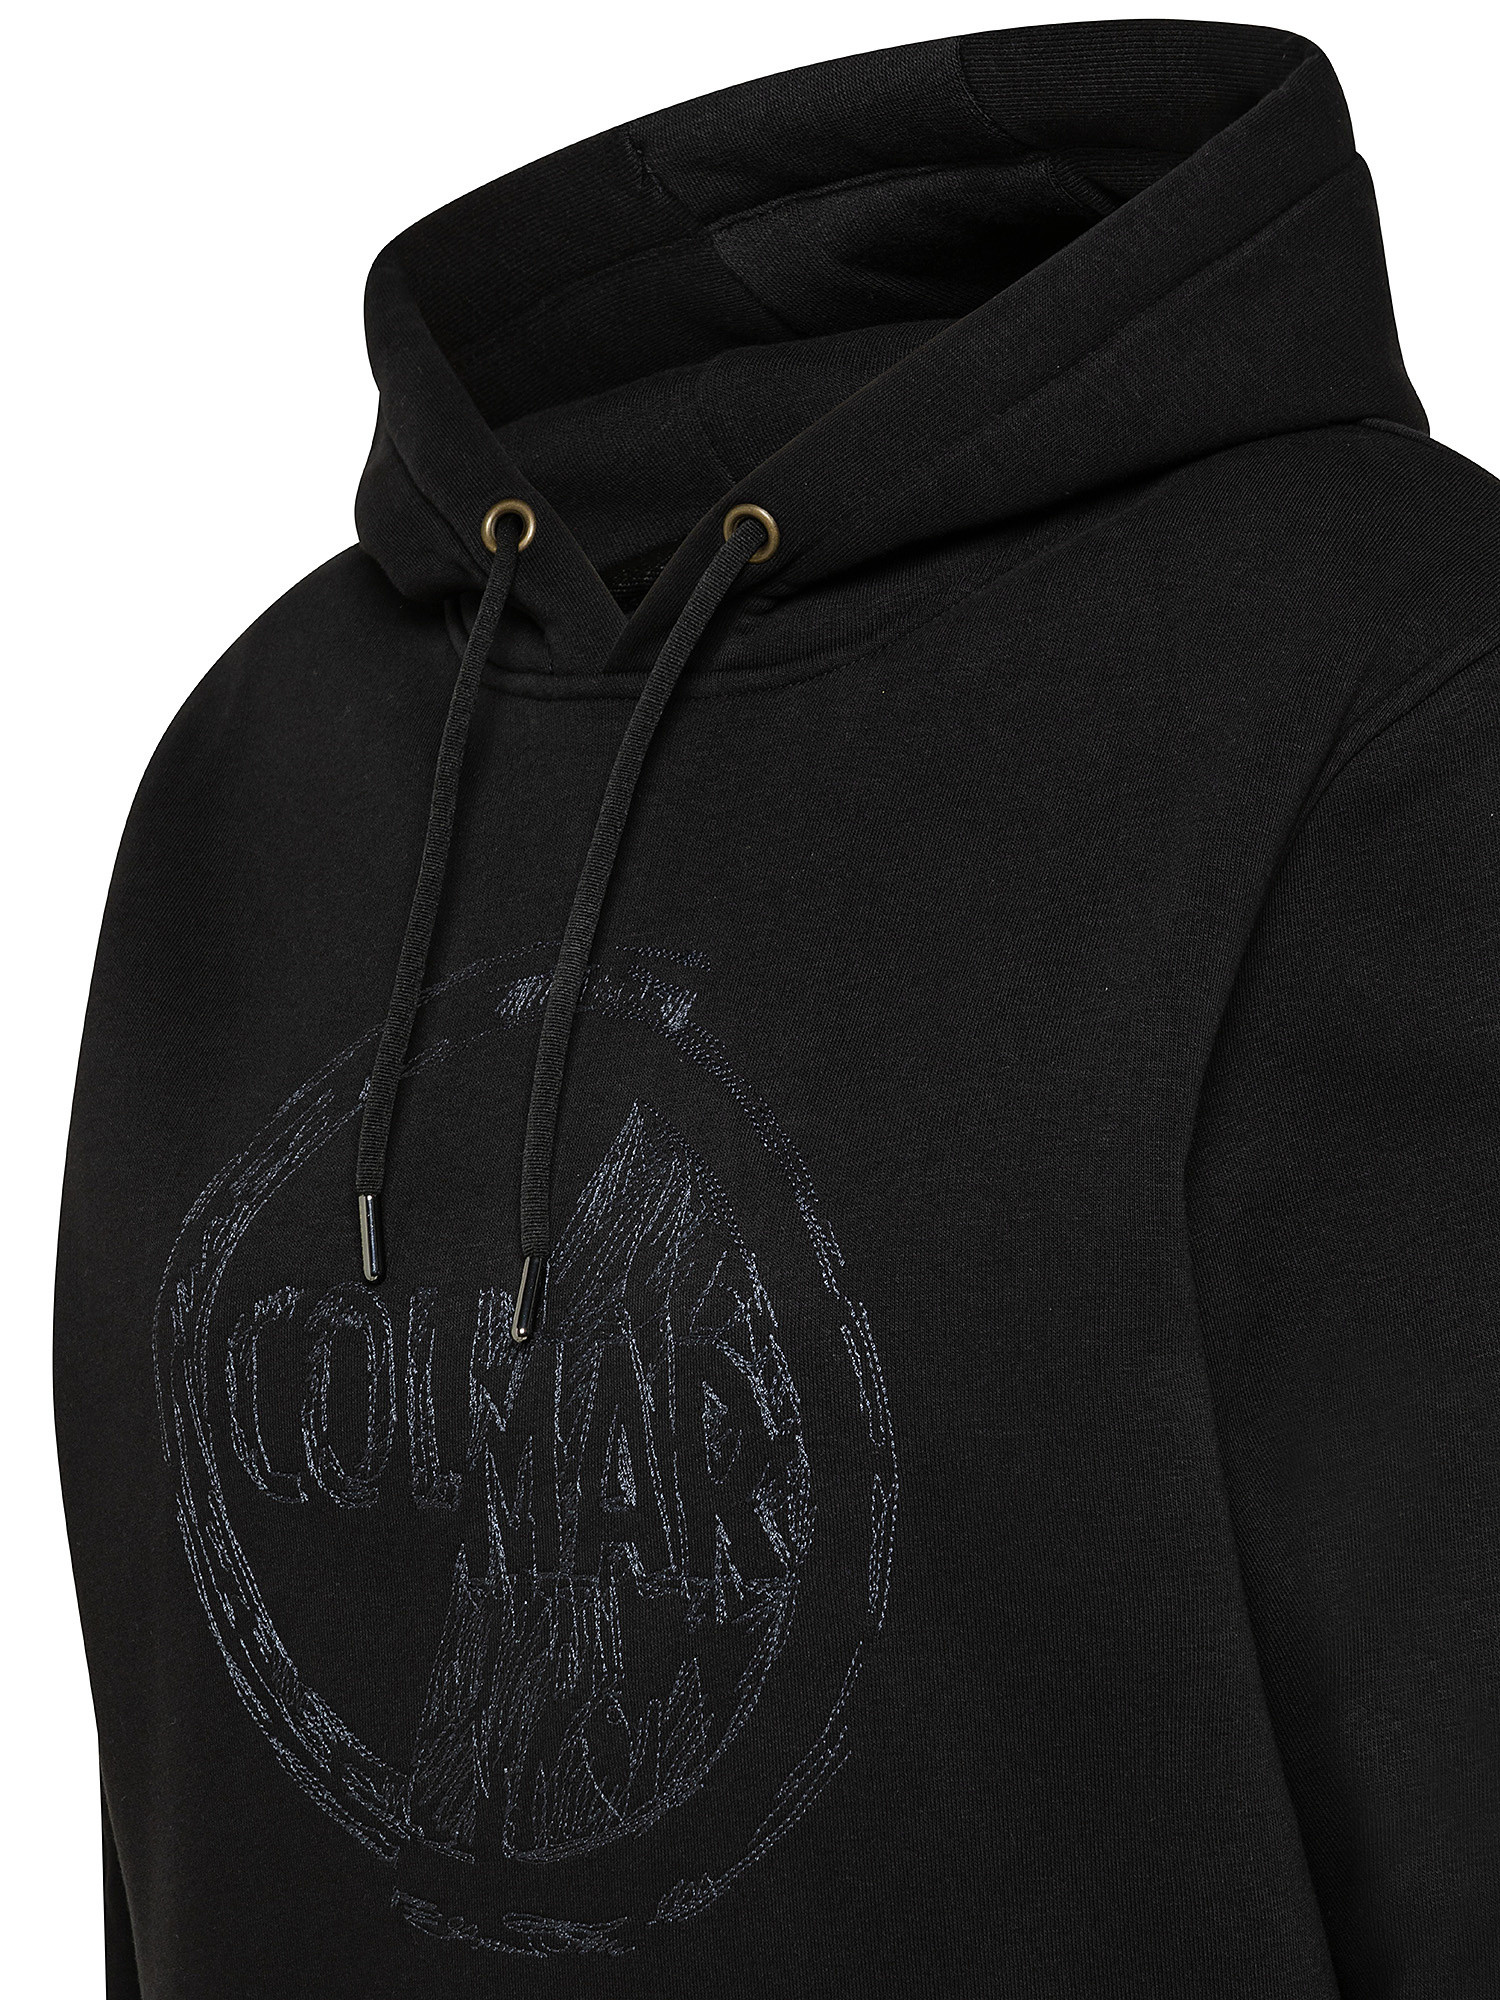 Hoodie sweatshirt with embroidery on chest, Black, large image number 2